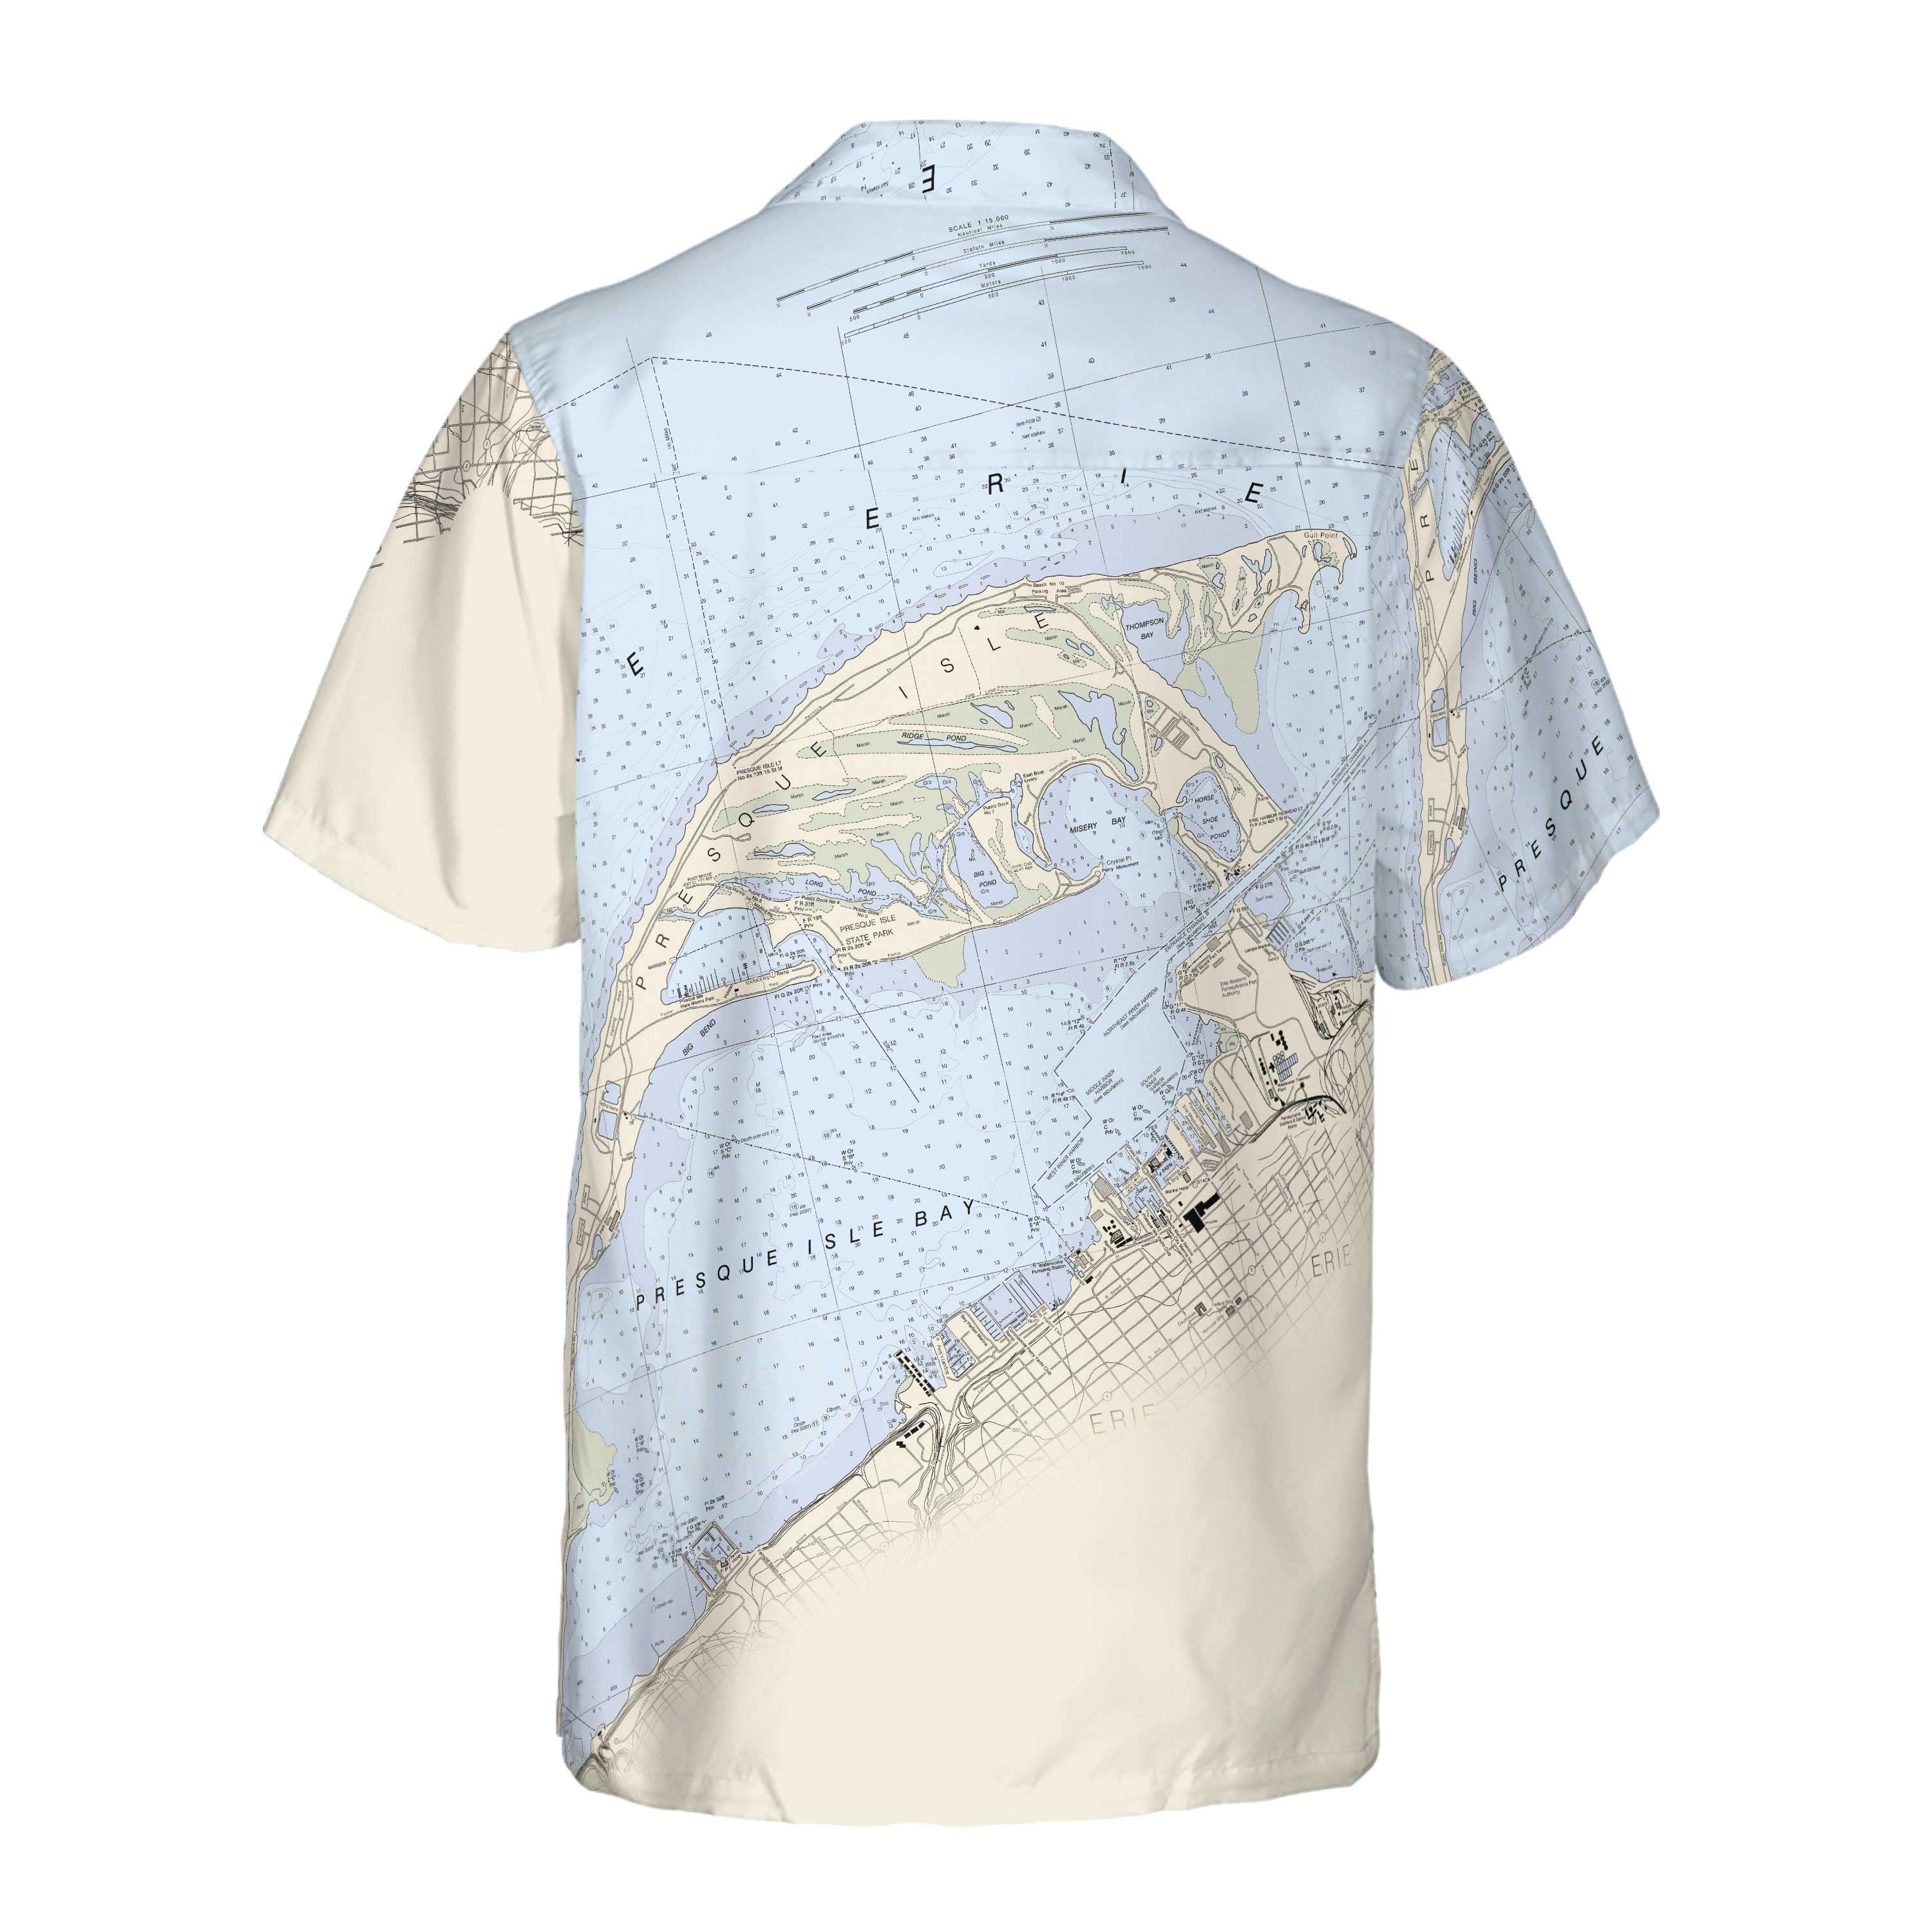 The Erie Harbor Coconut Button Camp Shirt